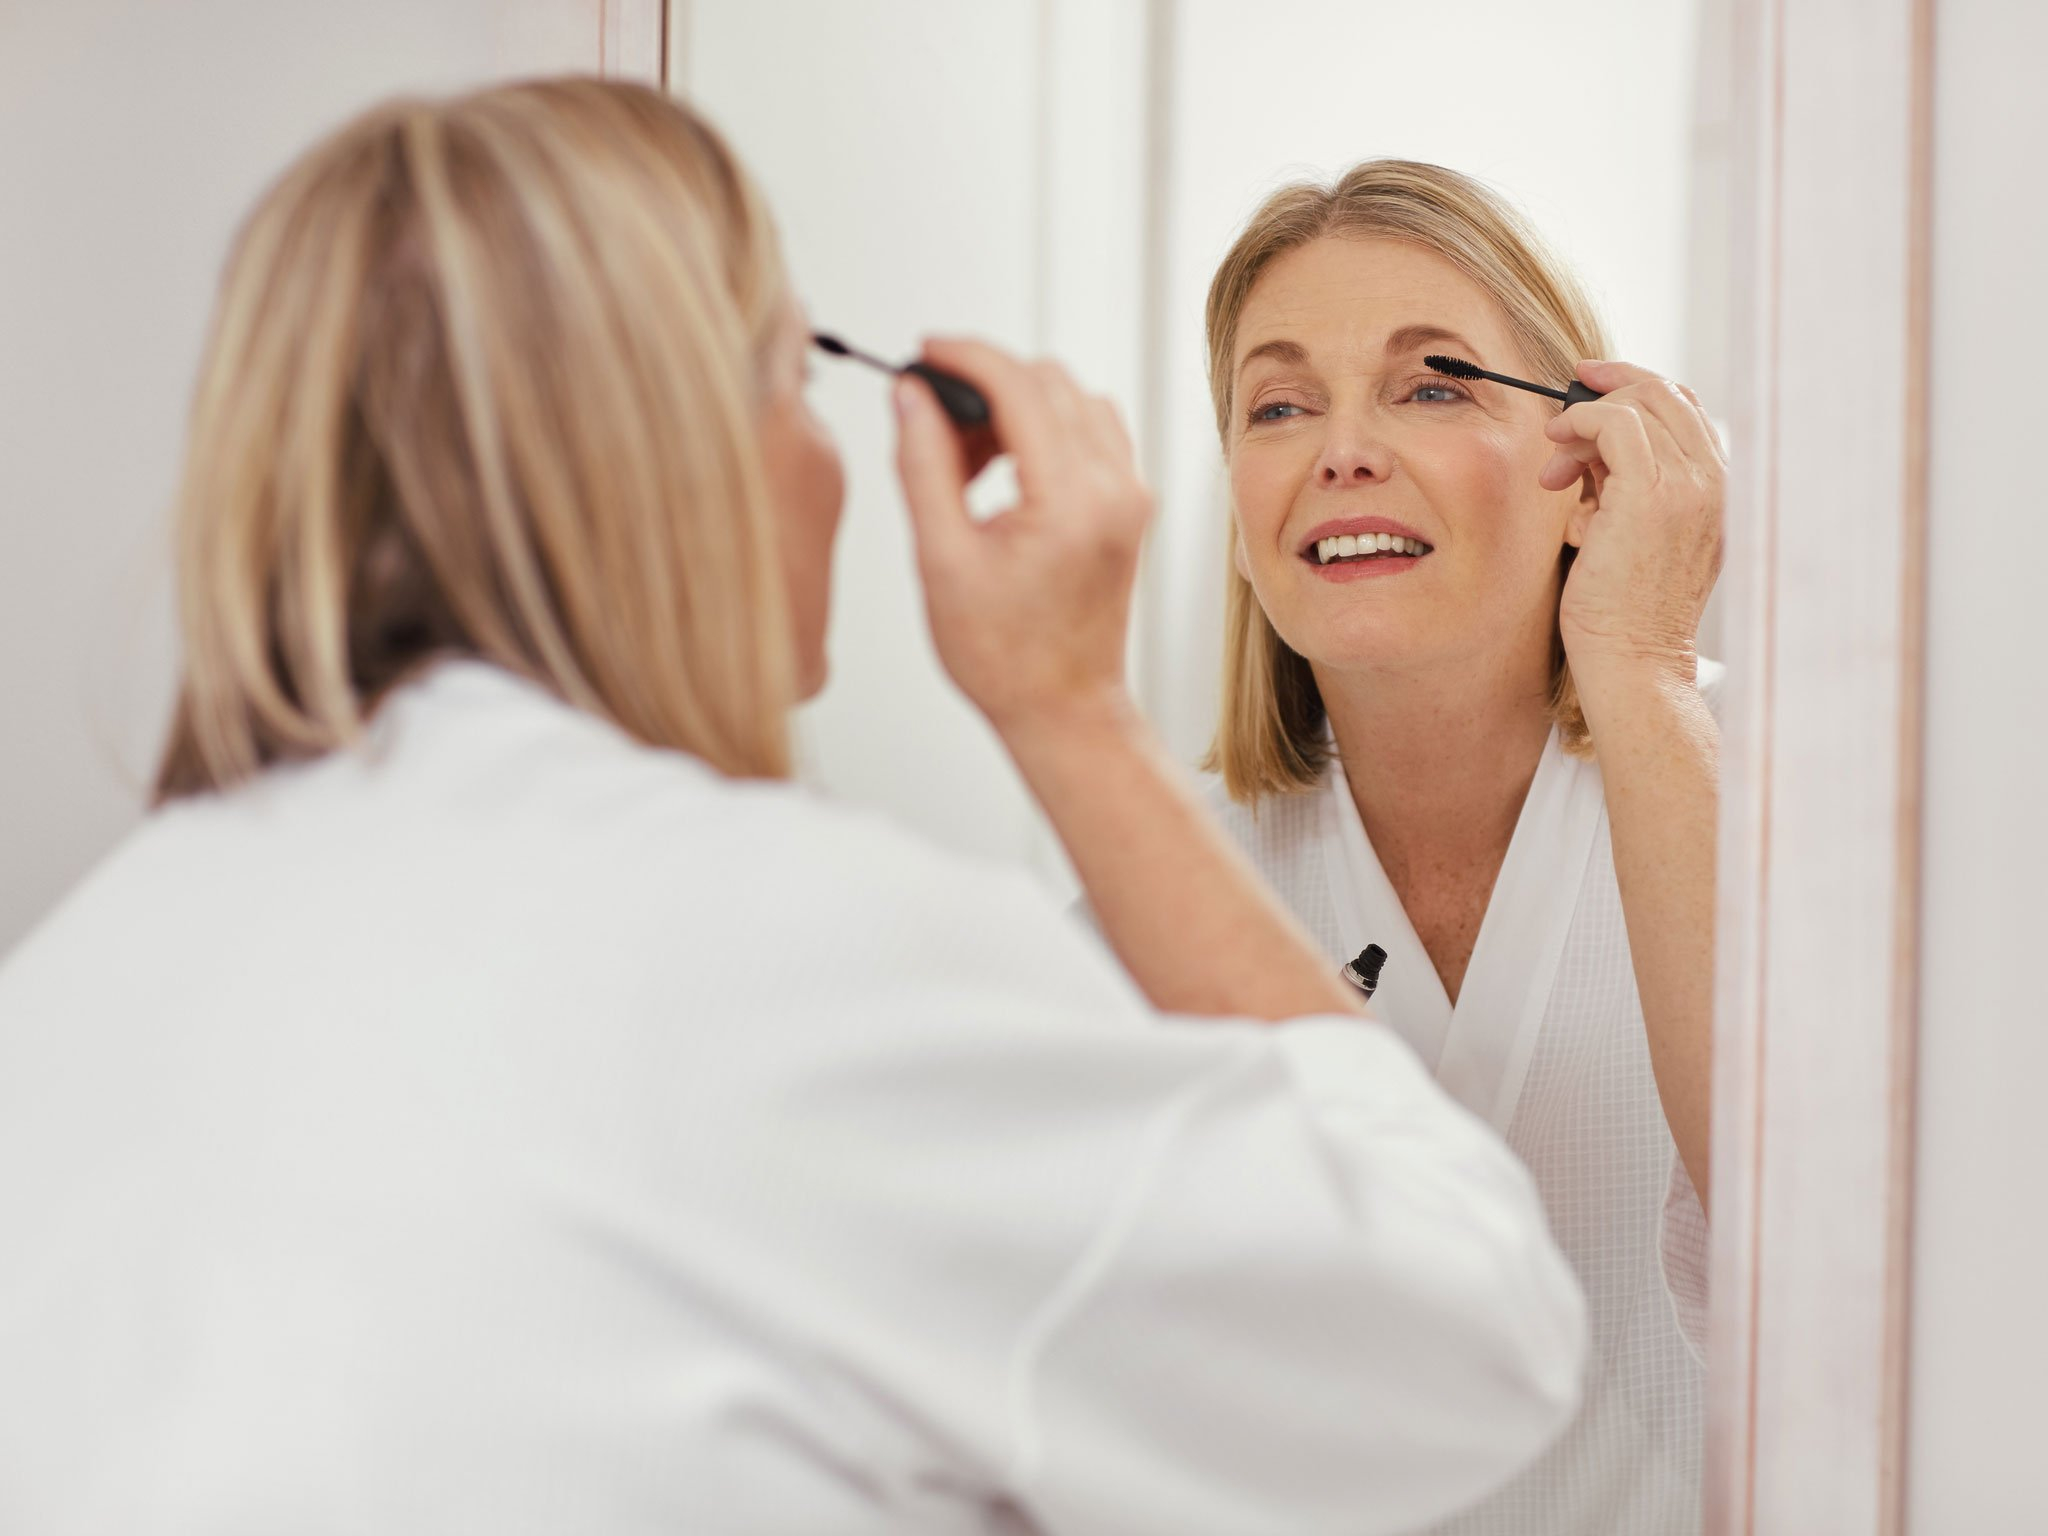 Best Eye Makeup For 50 Year Olds 13 Best Eye Makeup Products For Mature Skin The Independent